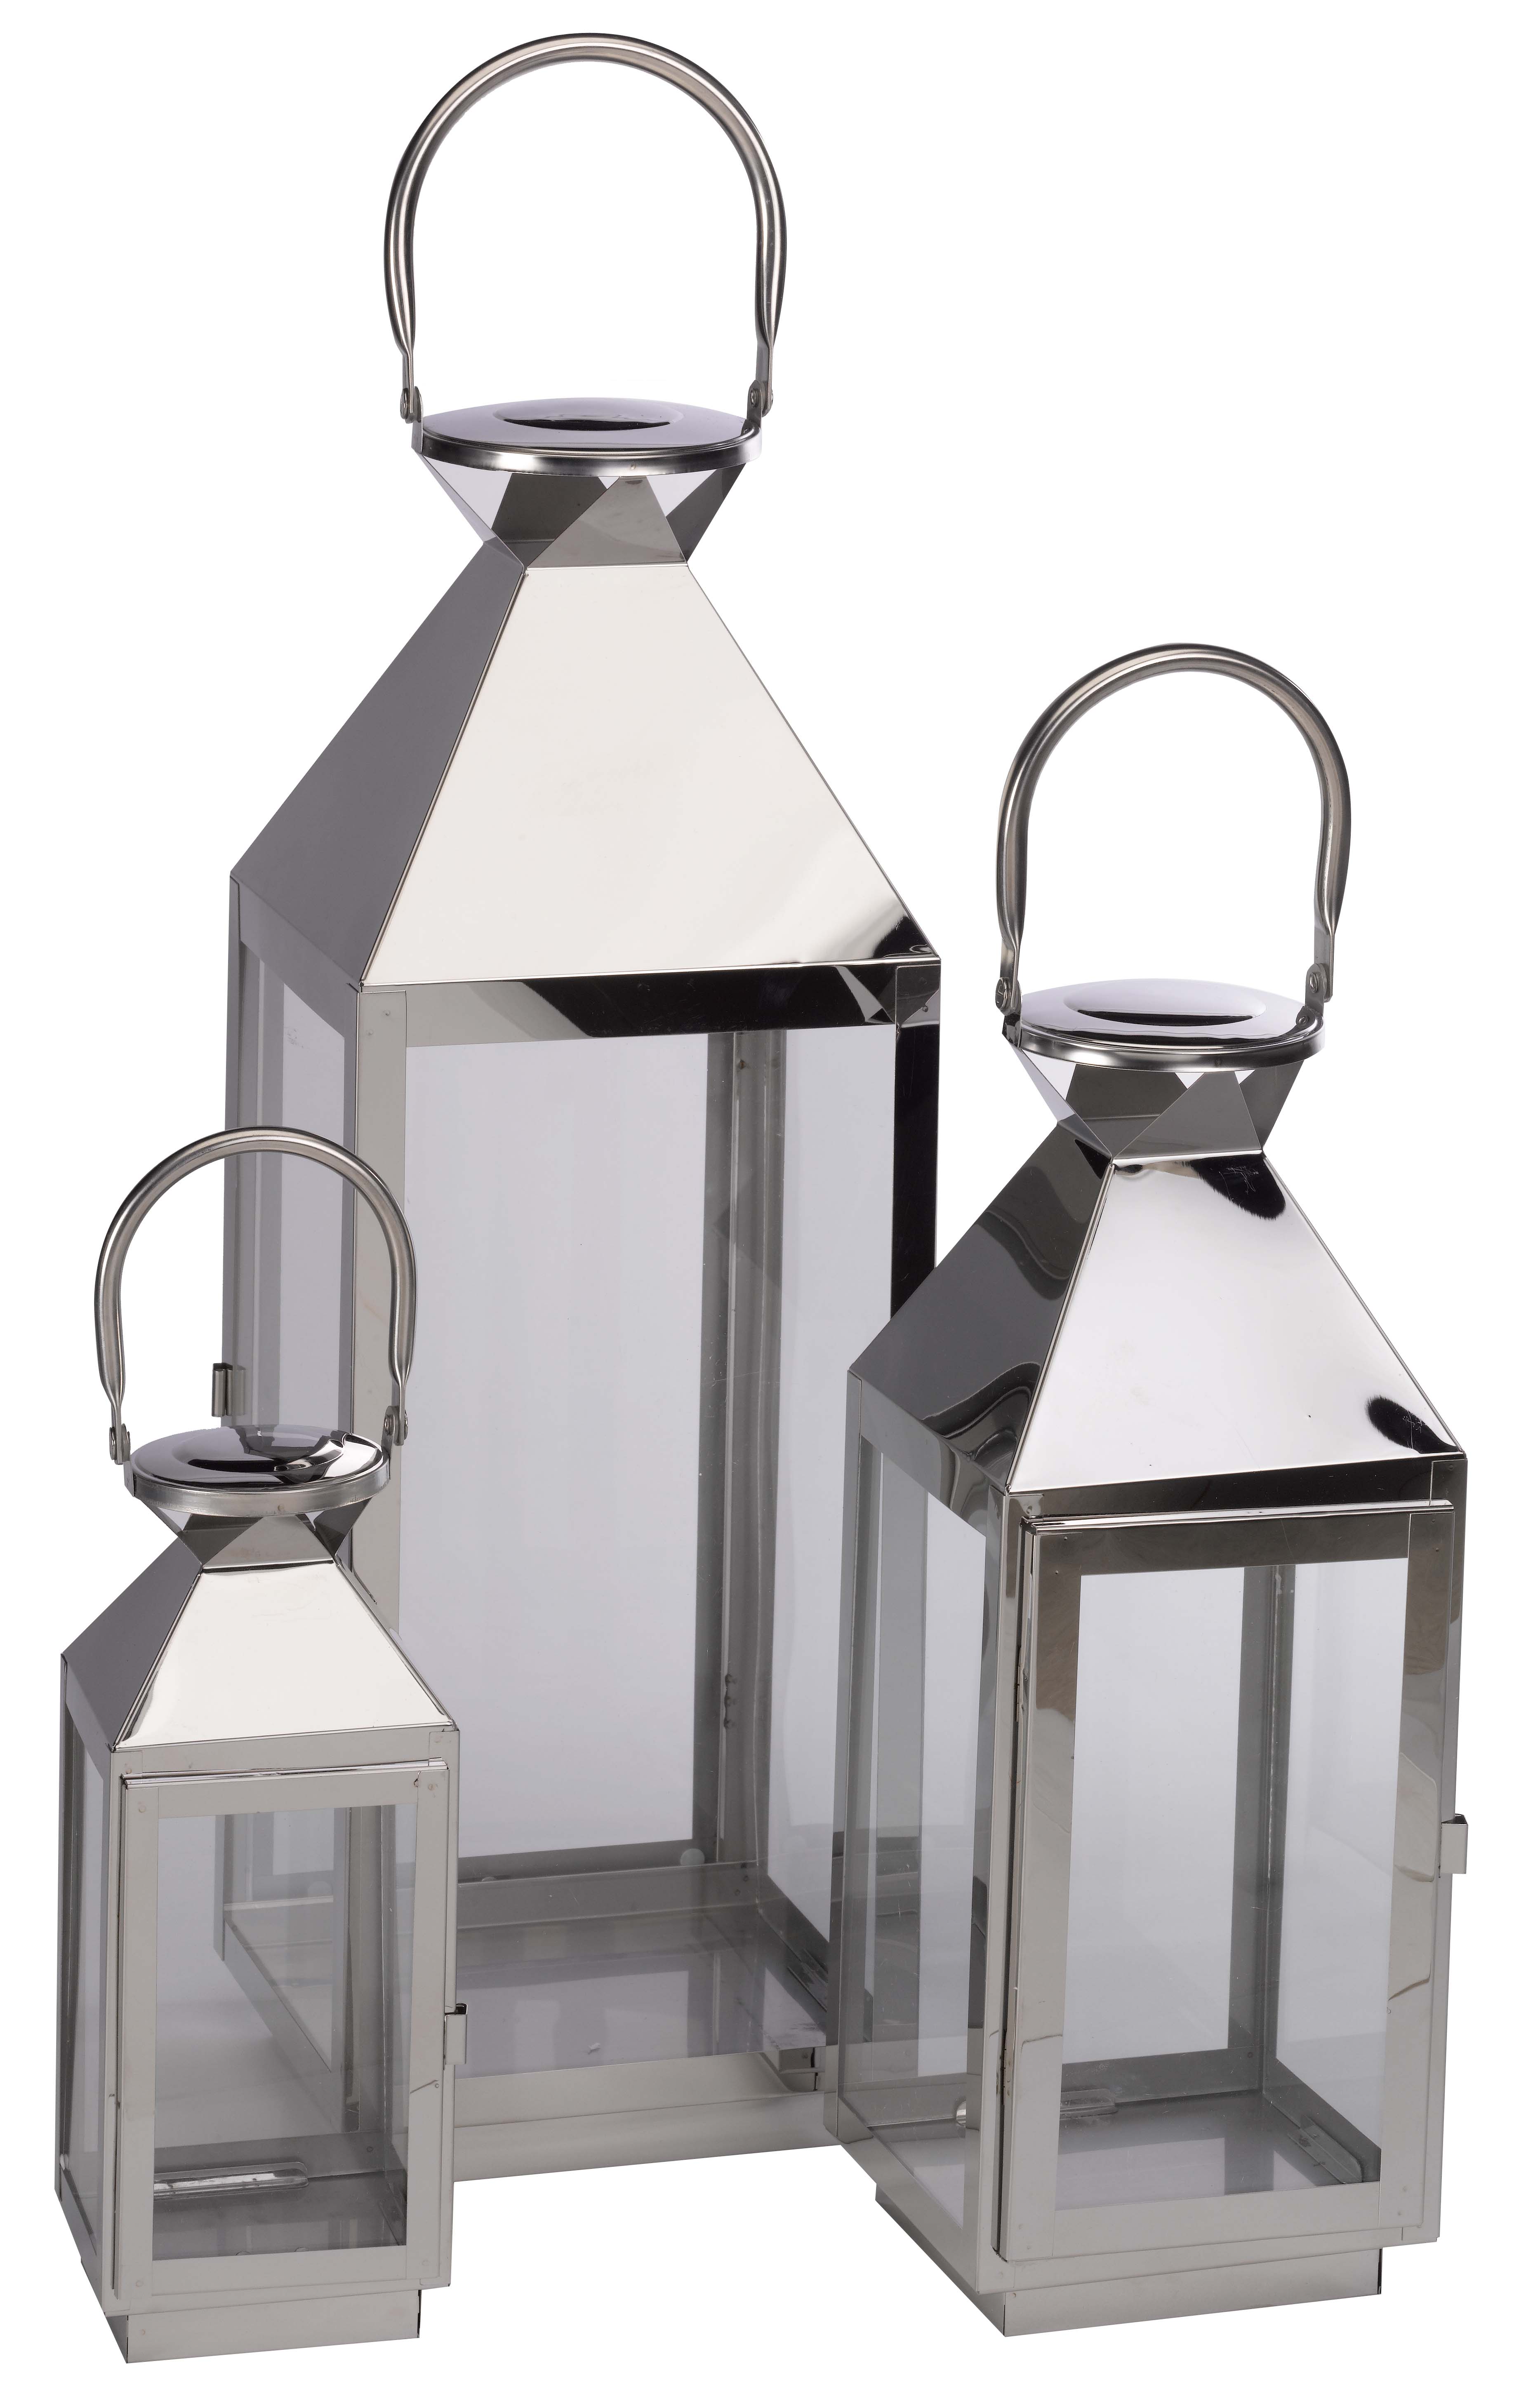 SMART SET OF 3 STOCKHOLM LED LATERN STAINLESS STEEL